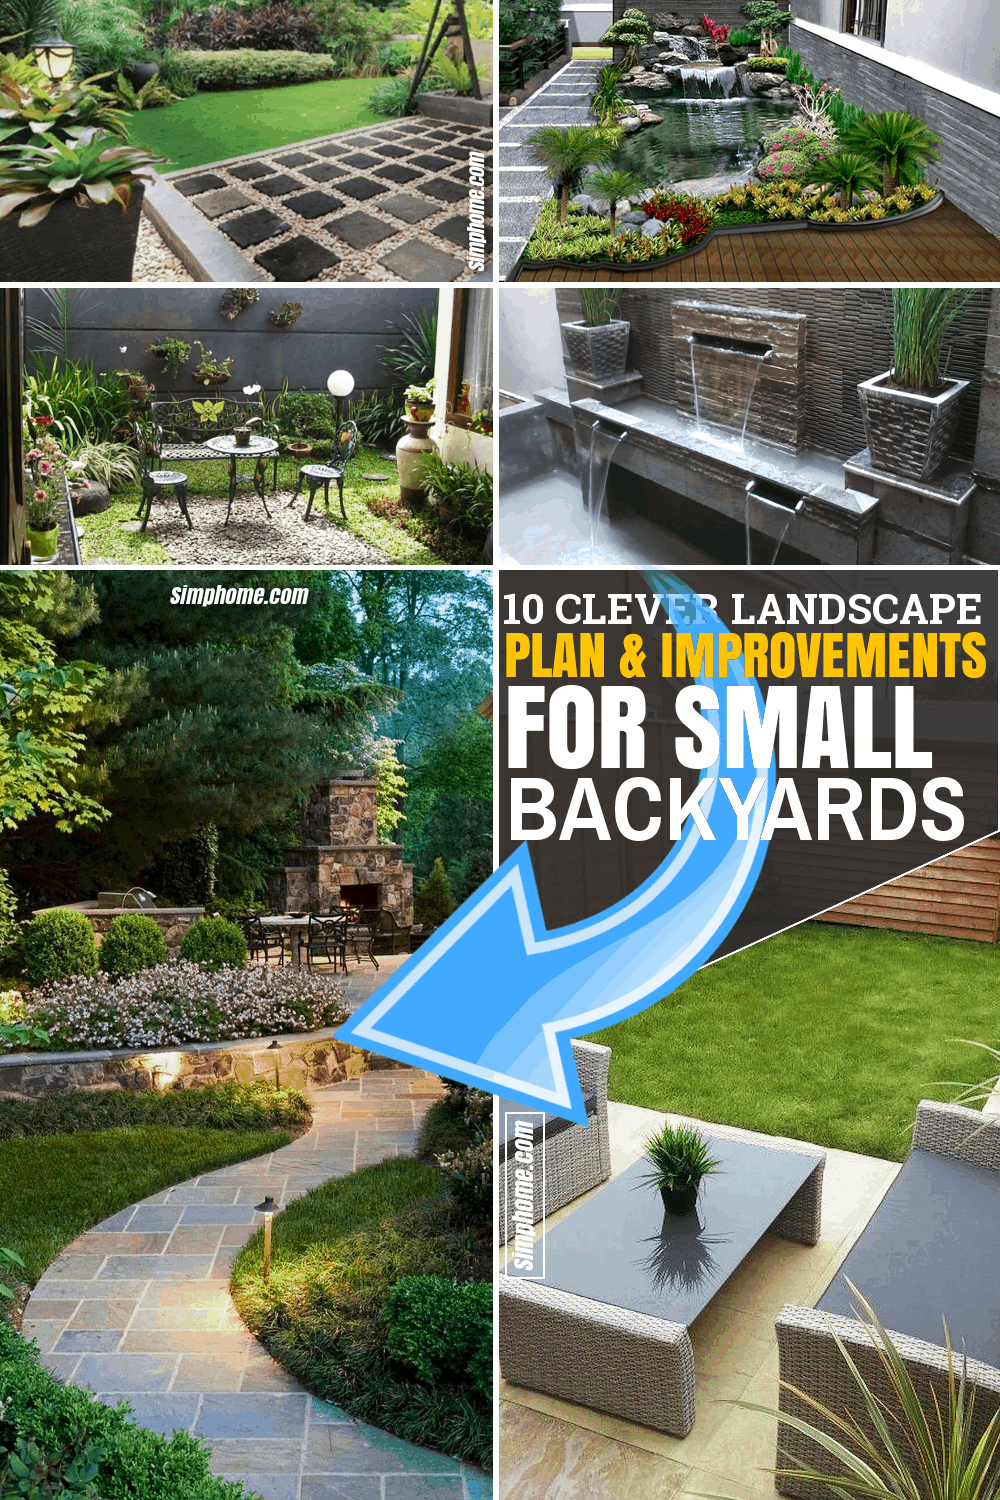 SIMPHOME.COM 10 Clever Landscape Design Plans and Improvements for a Small Backyard Featured Image